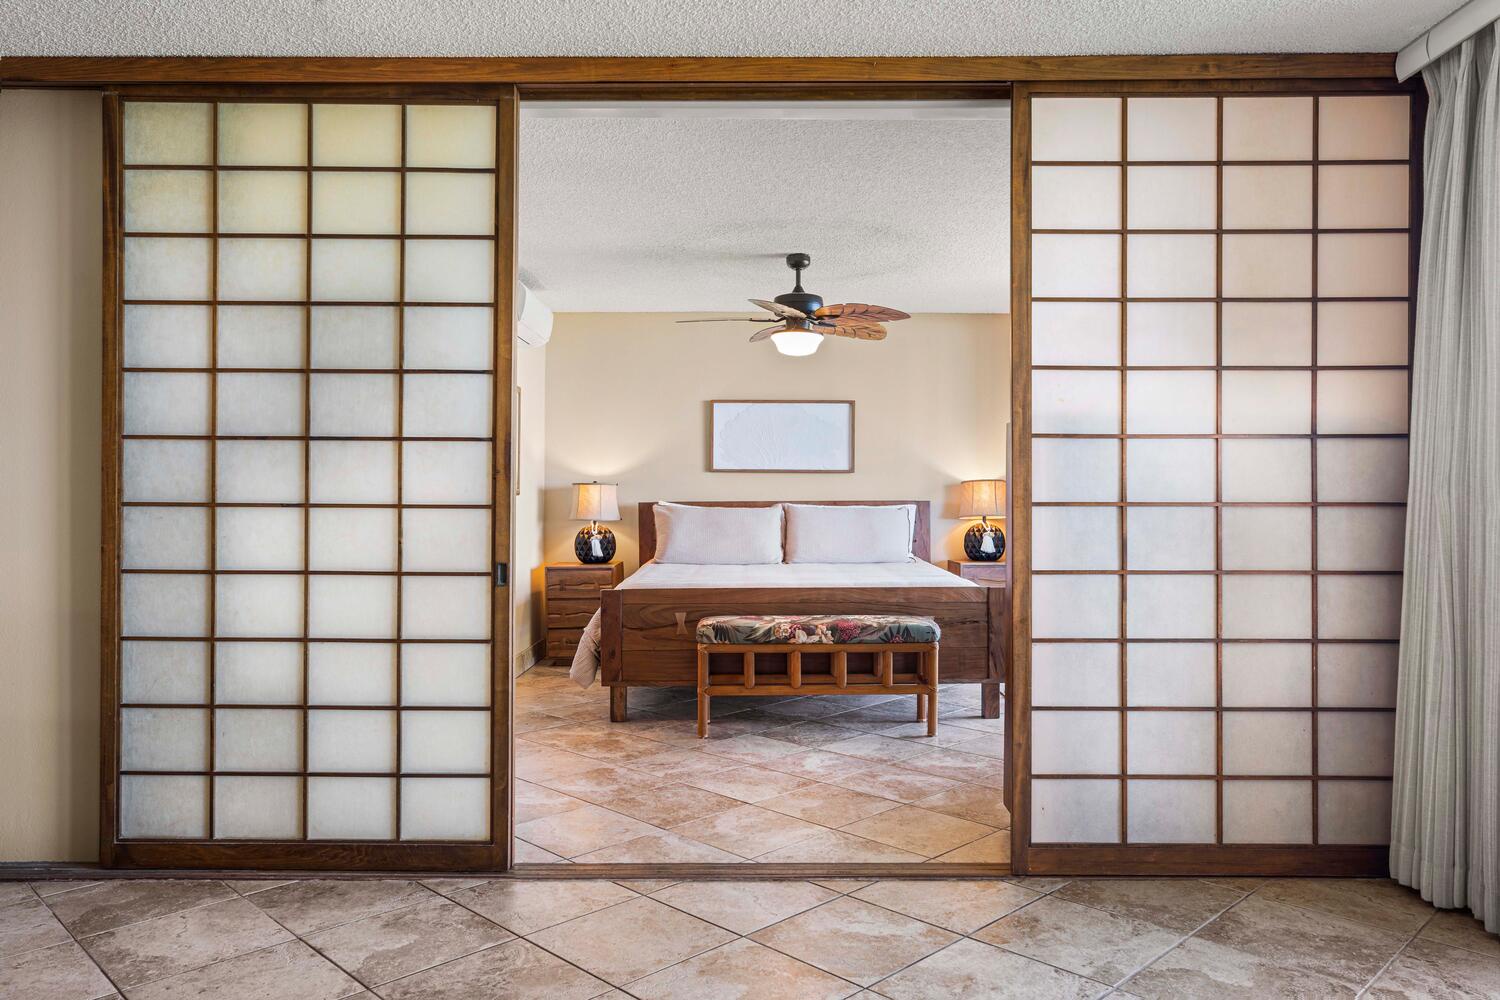 Kailua Kona Vacation Rentals, Keauhou Kona Surf & Racquet 1104 - Welcome to the primary suite, where a cozy ambiance invites you to unwind in comfort and style.